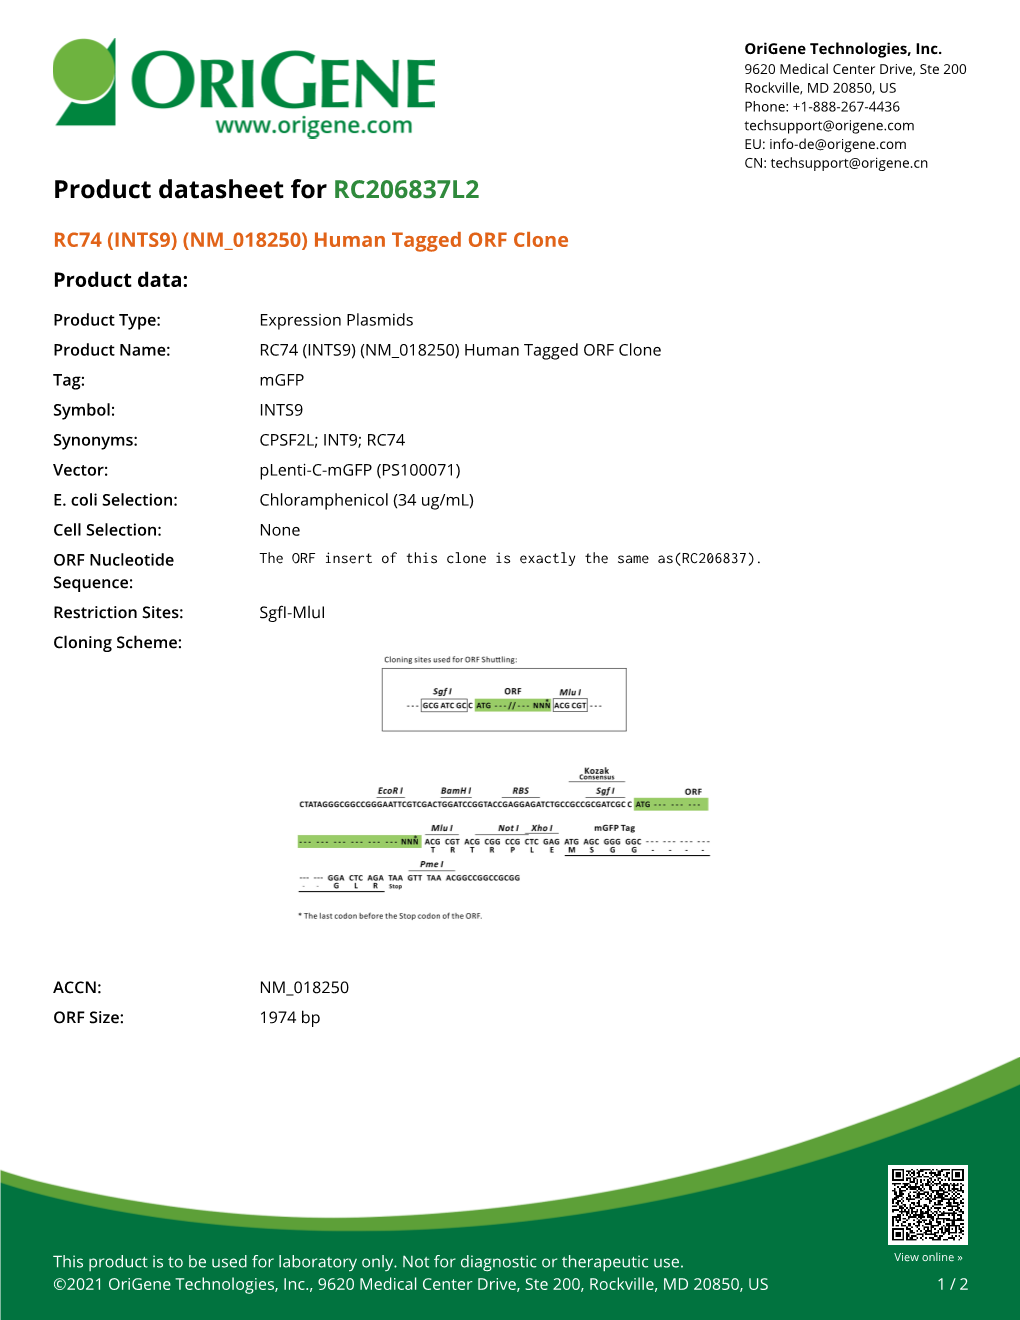 RC74 (INTS9) (NM 018250) Human Tagged ORF Clone Product Data